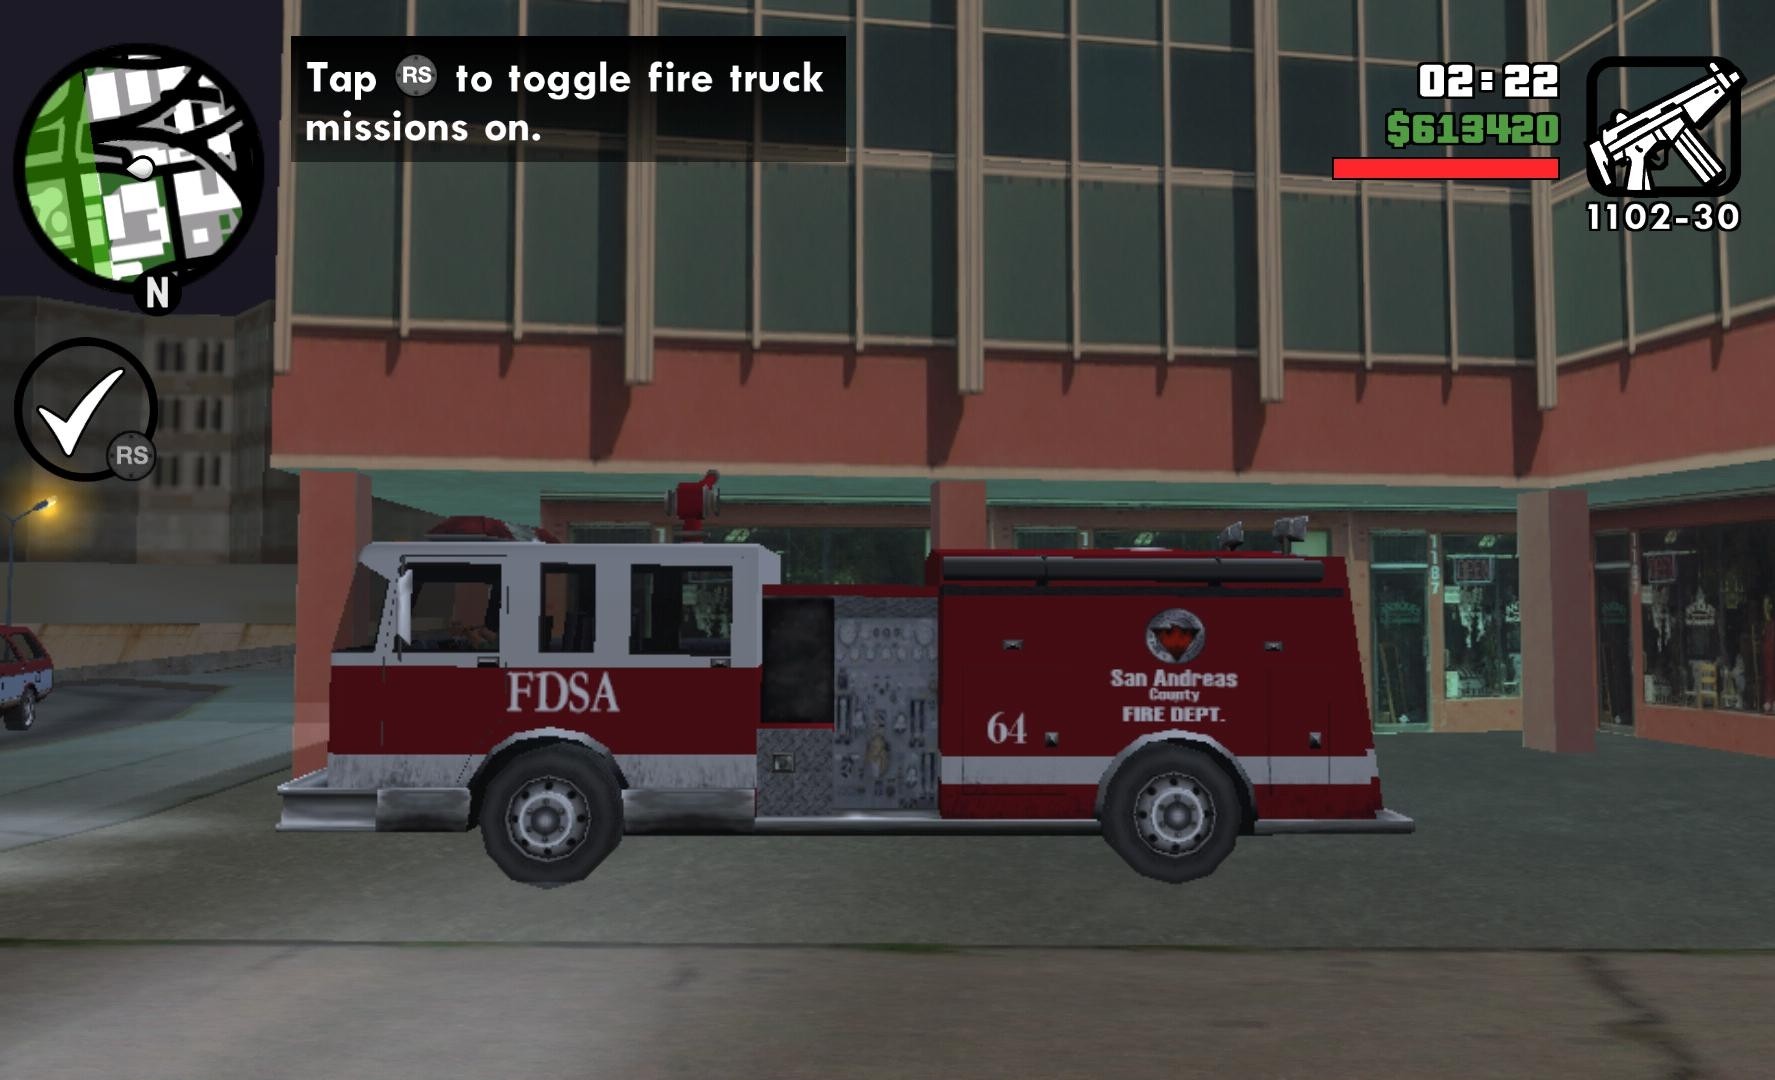 The firetruck missions also made their appearances in gta3 and gta vice cit...